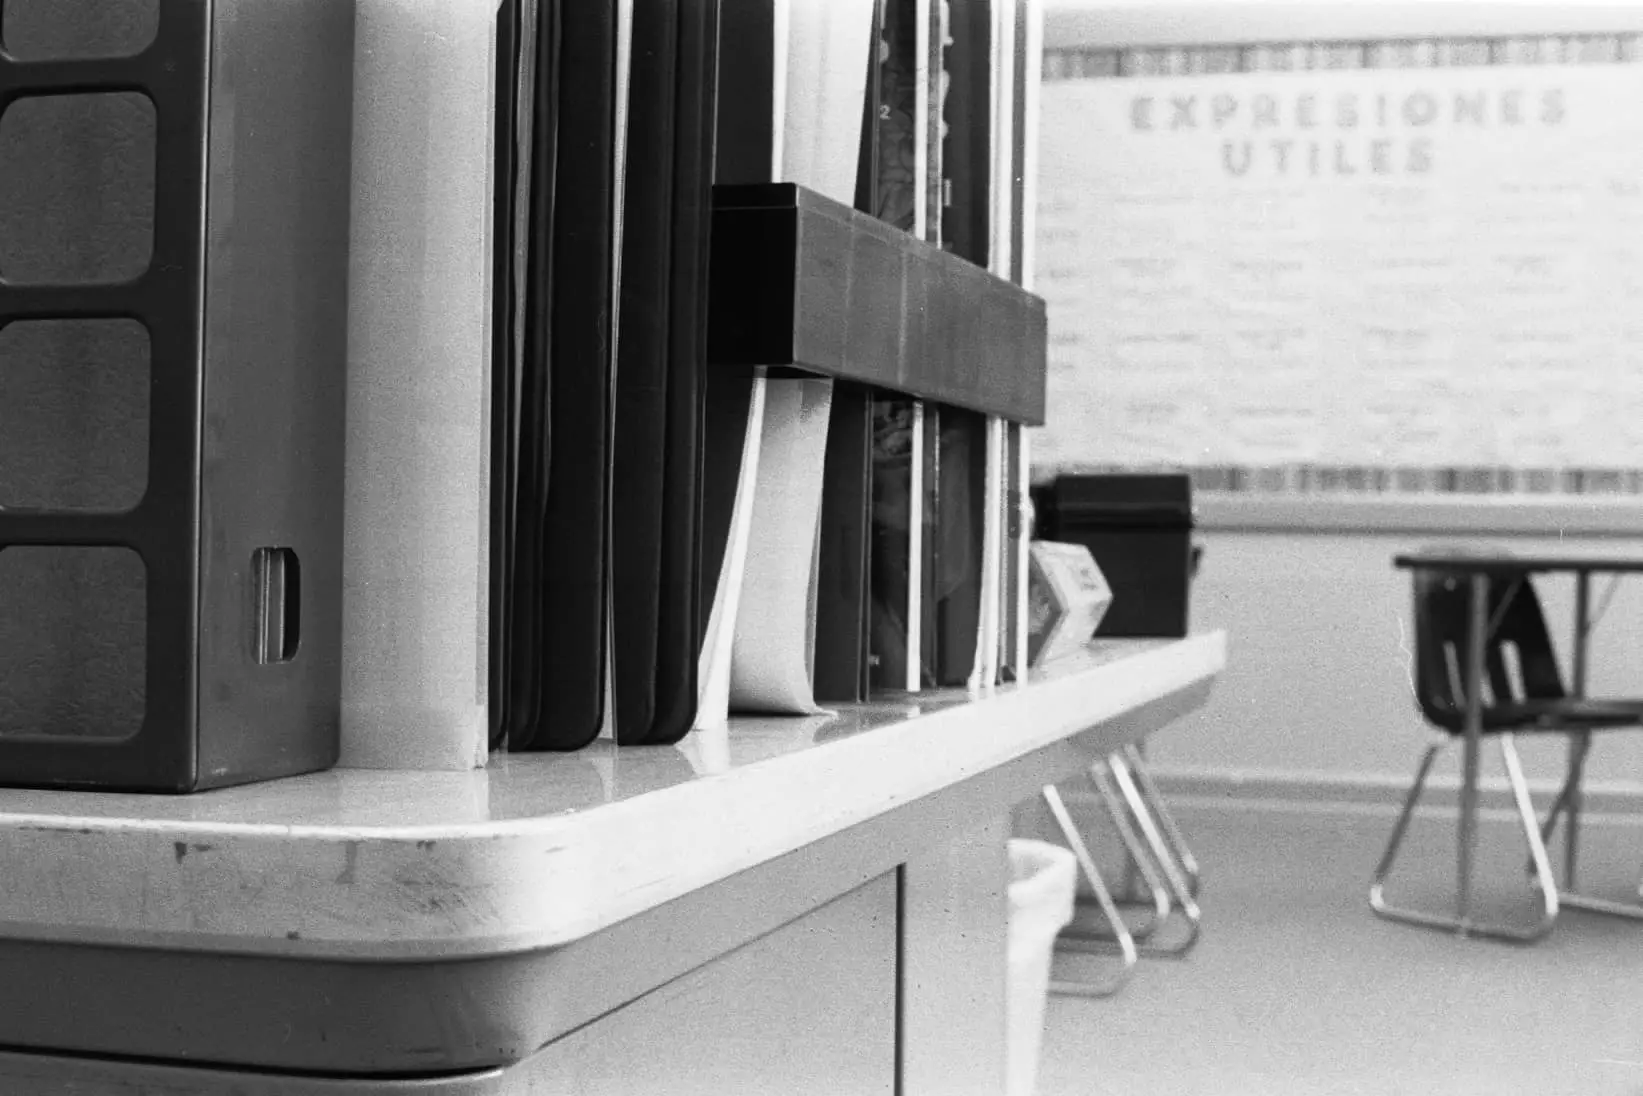 whiteboard and desks in classroom in black and white